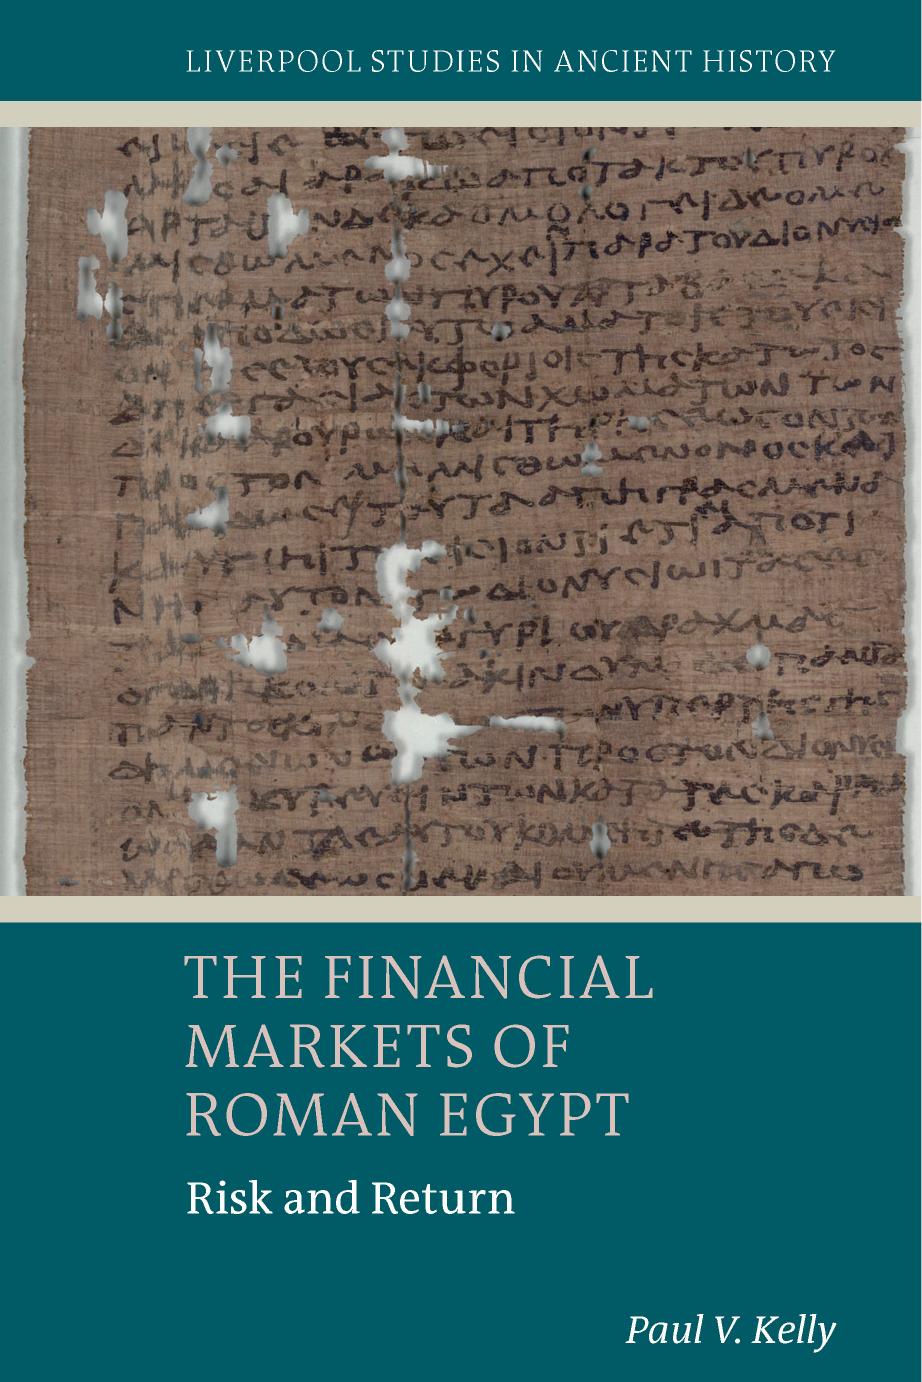 The Financial Markets of Roman Egypt: Risk and Return (Liverpool Studies in Ancient History) by Paul V. Kelly